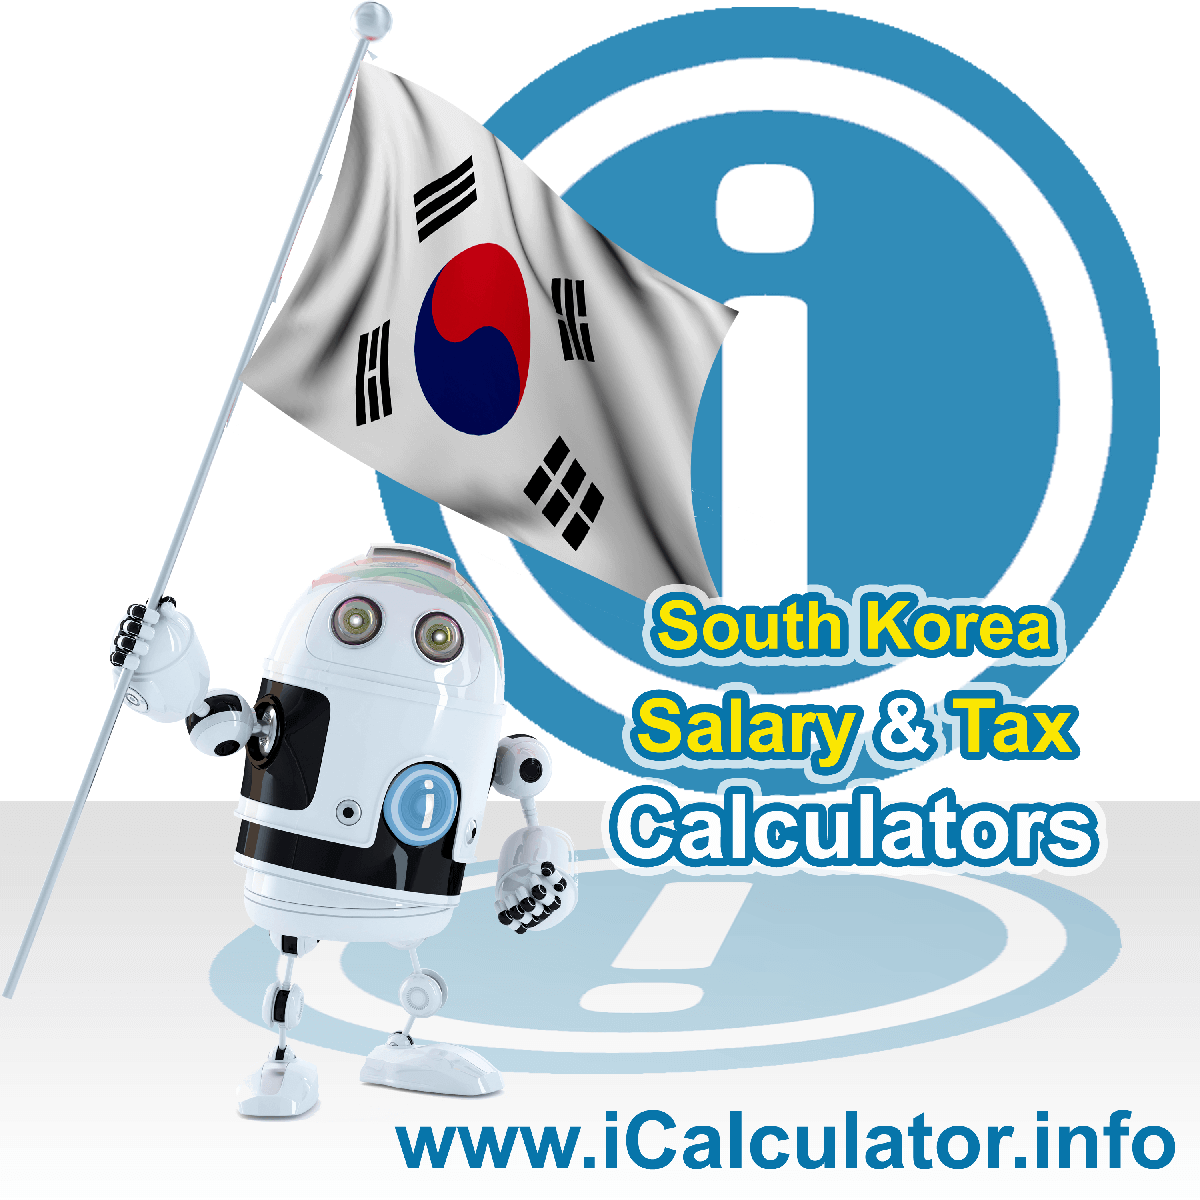 South Korea Tax Calculator. This image shows the South Korea flag and information relating to the tax formula for the South Korea Salary Calculator